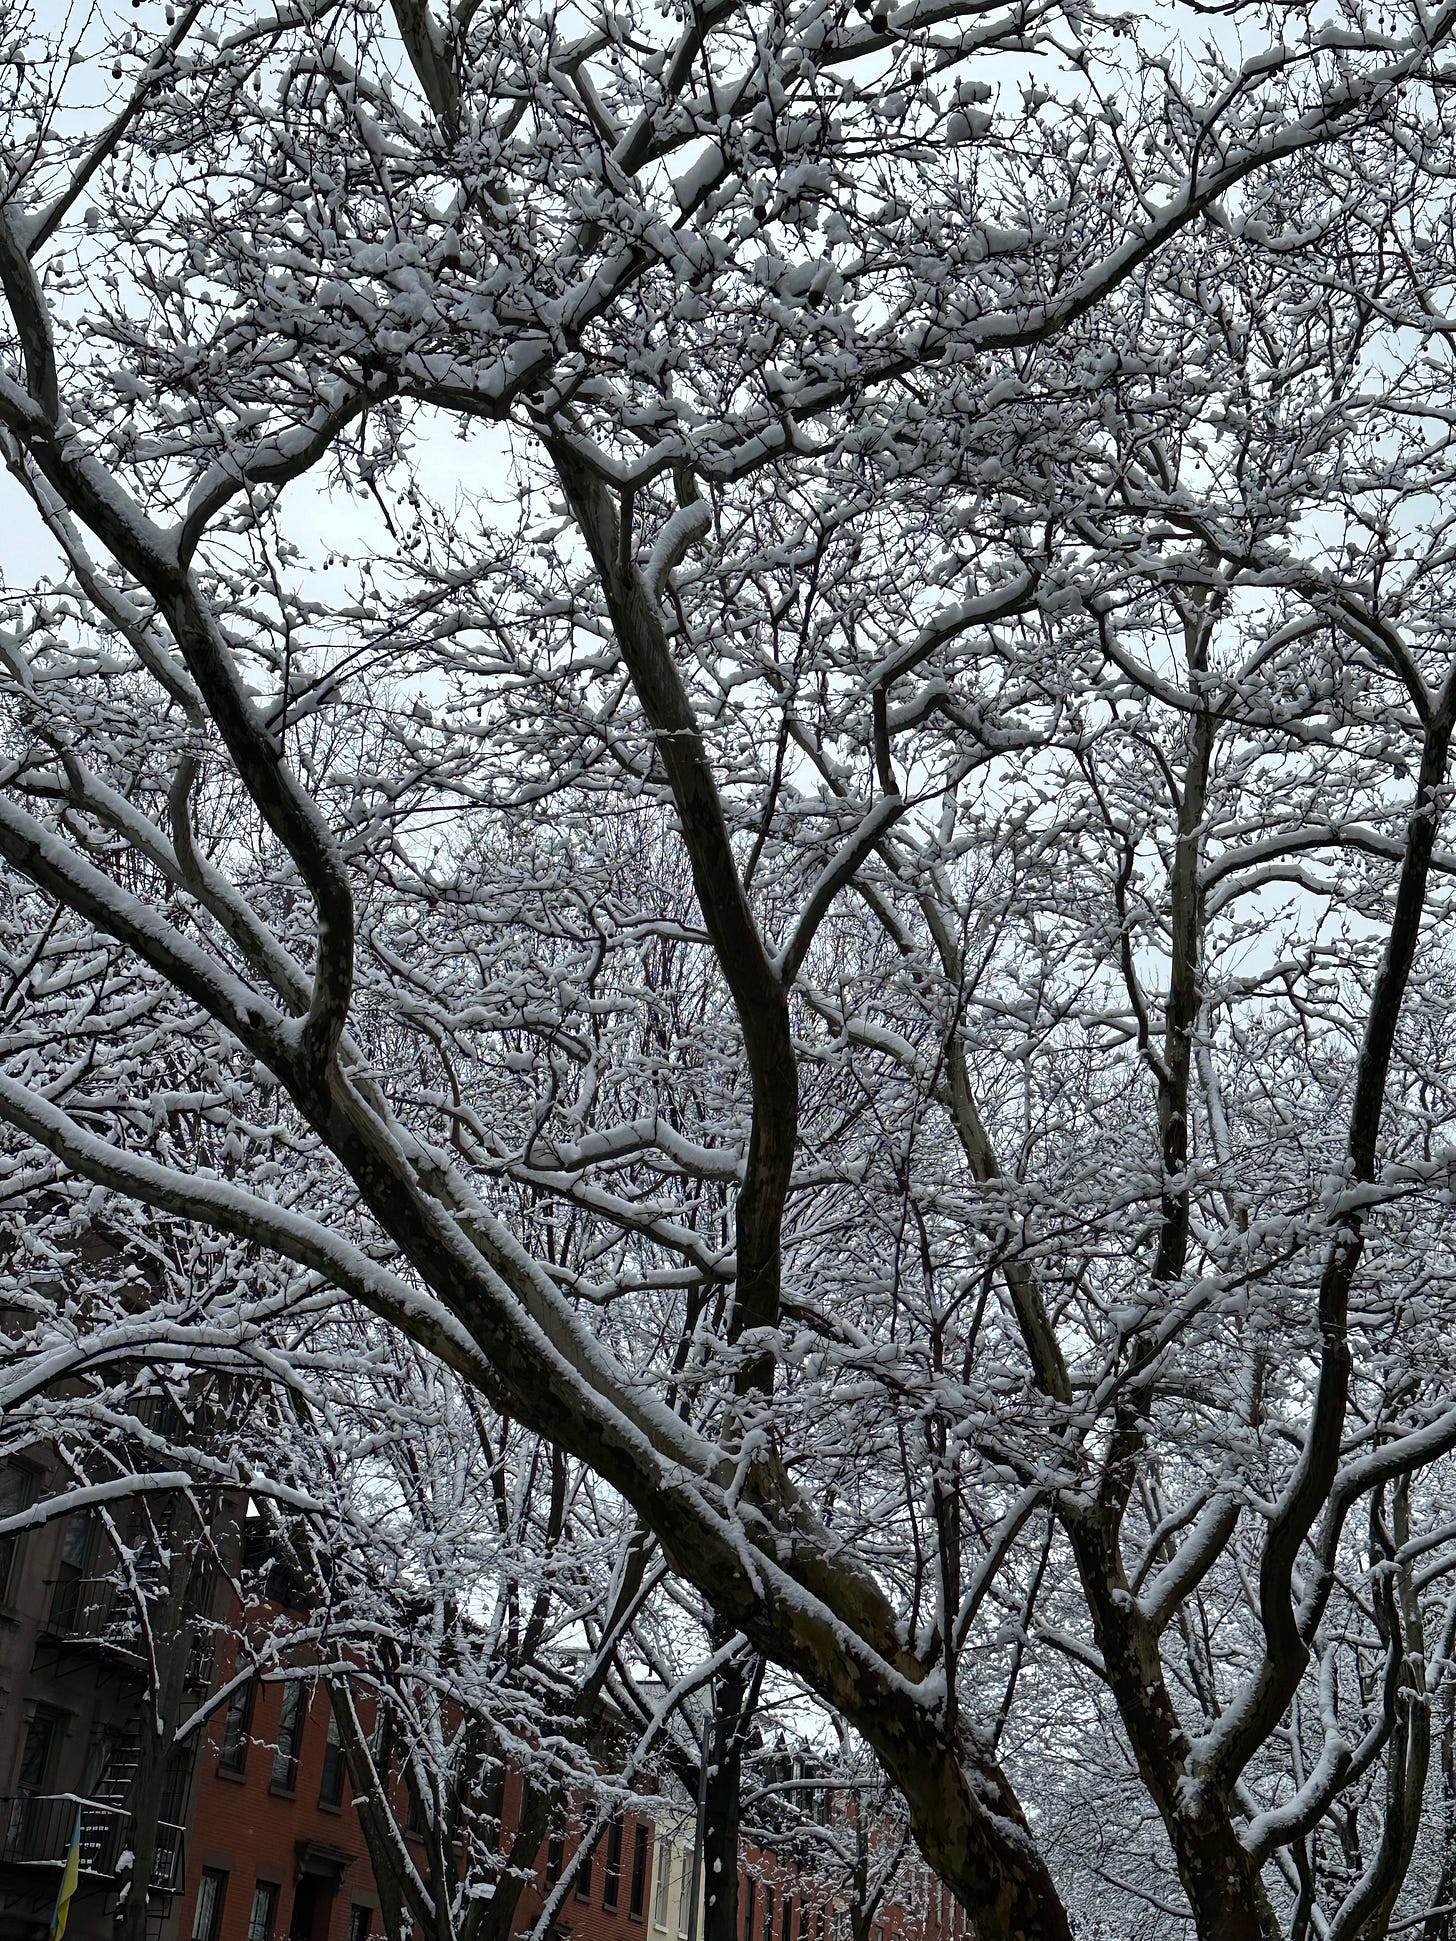 Snow-covered trees, the kind we thought might never exist again in New York City.